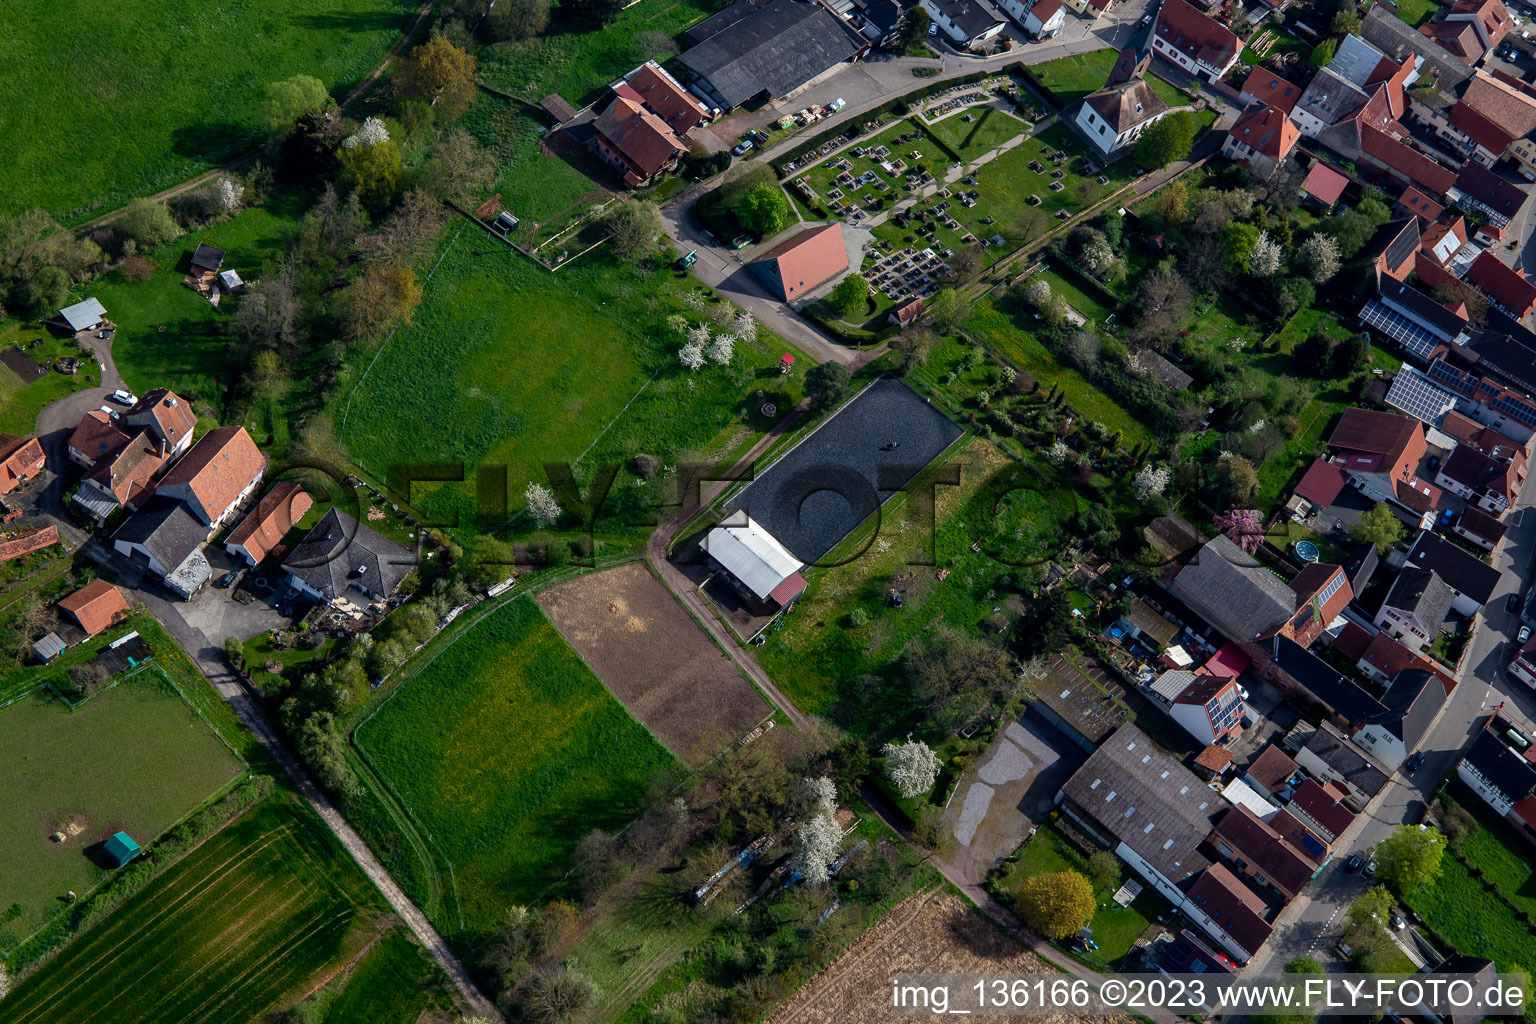 Bird's eye view of Equestrian facility at the cemetery in Winden in the state Rhineland-Palatinate, Germany